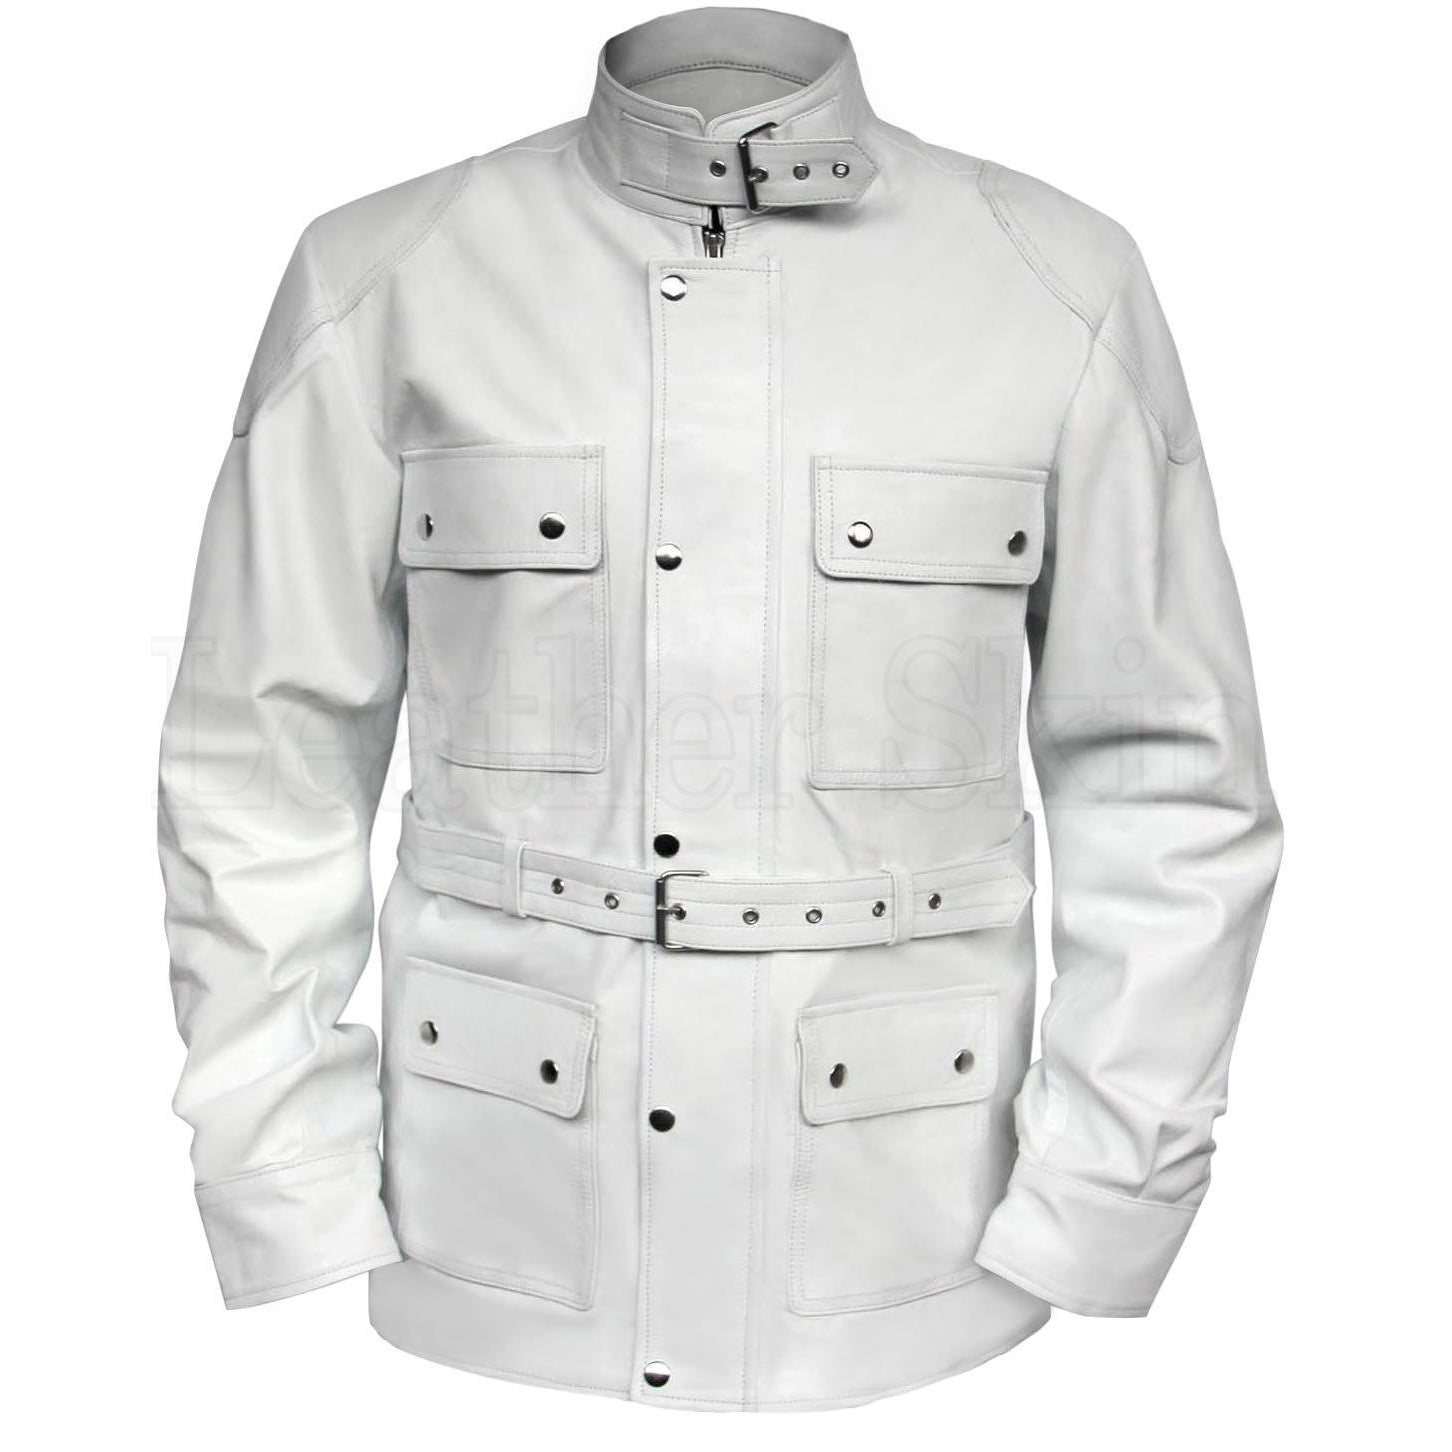 Unisex White Belted Genuine Leather Jacket with Front Pockets